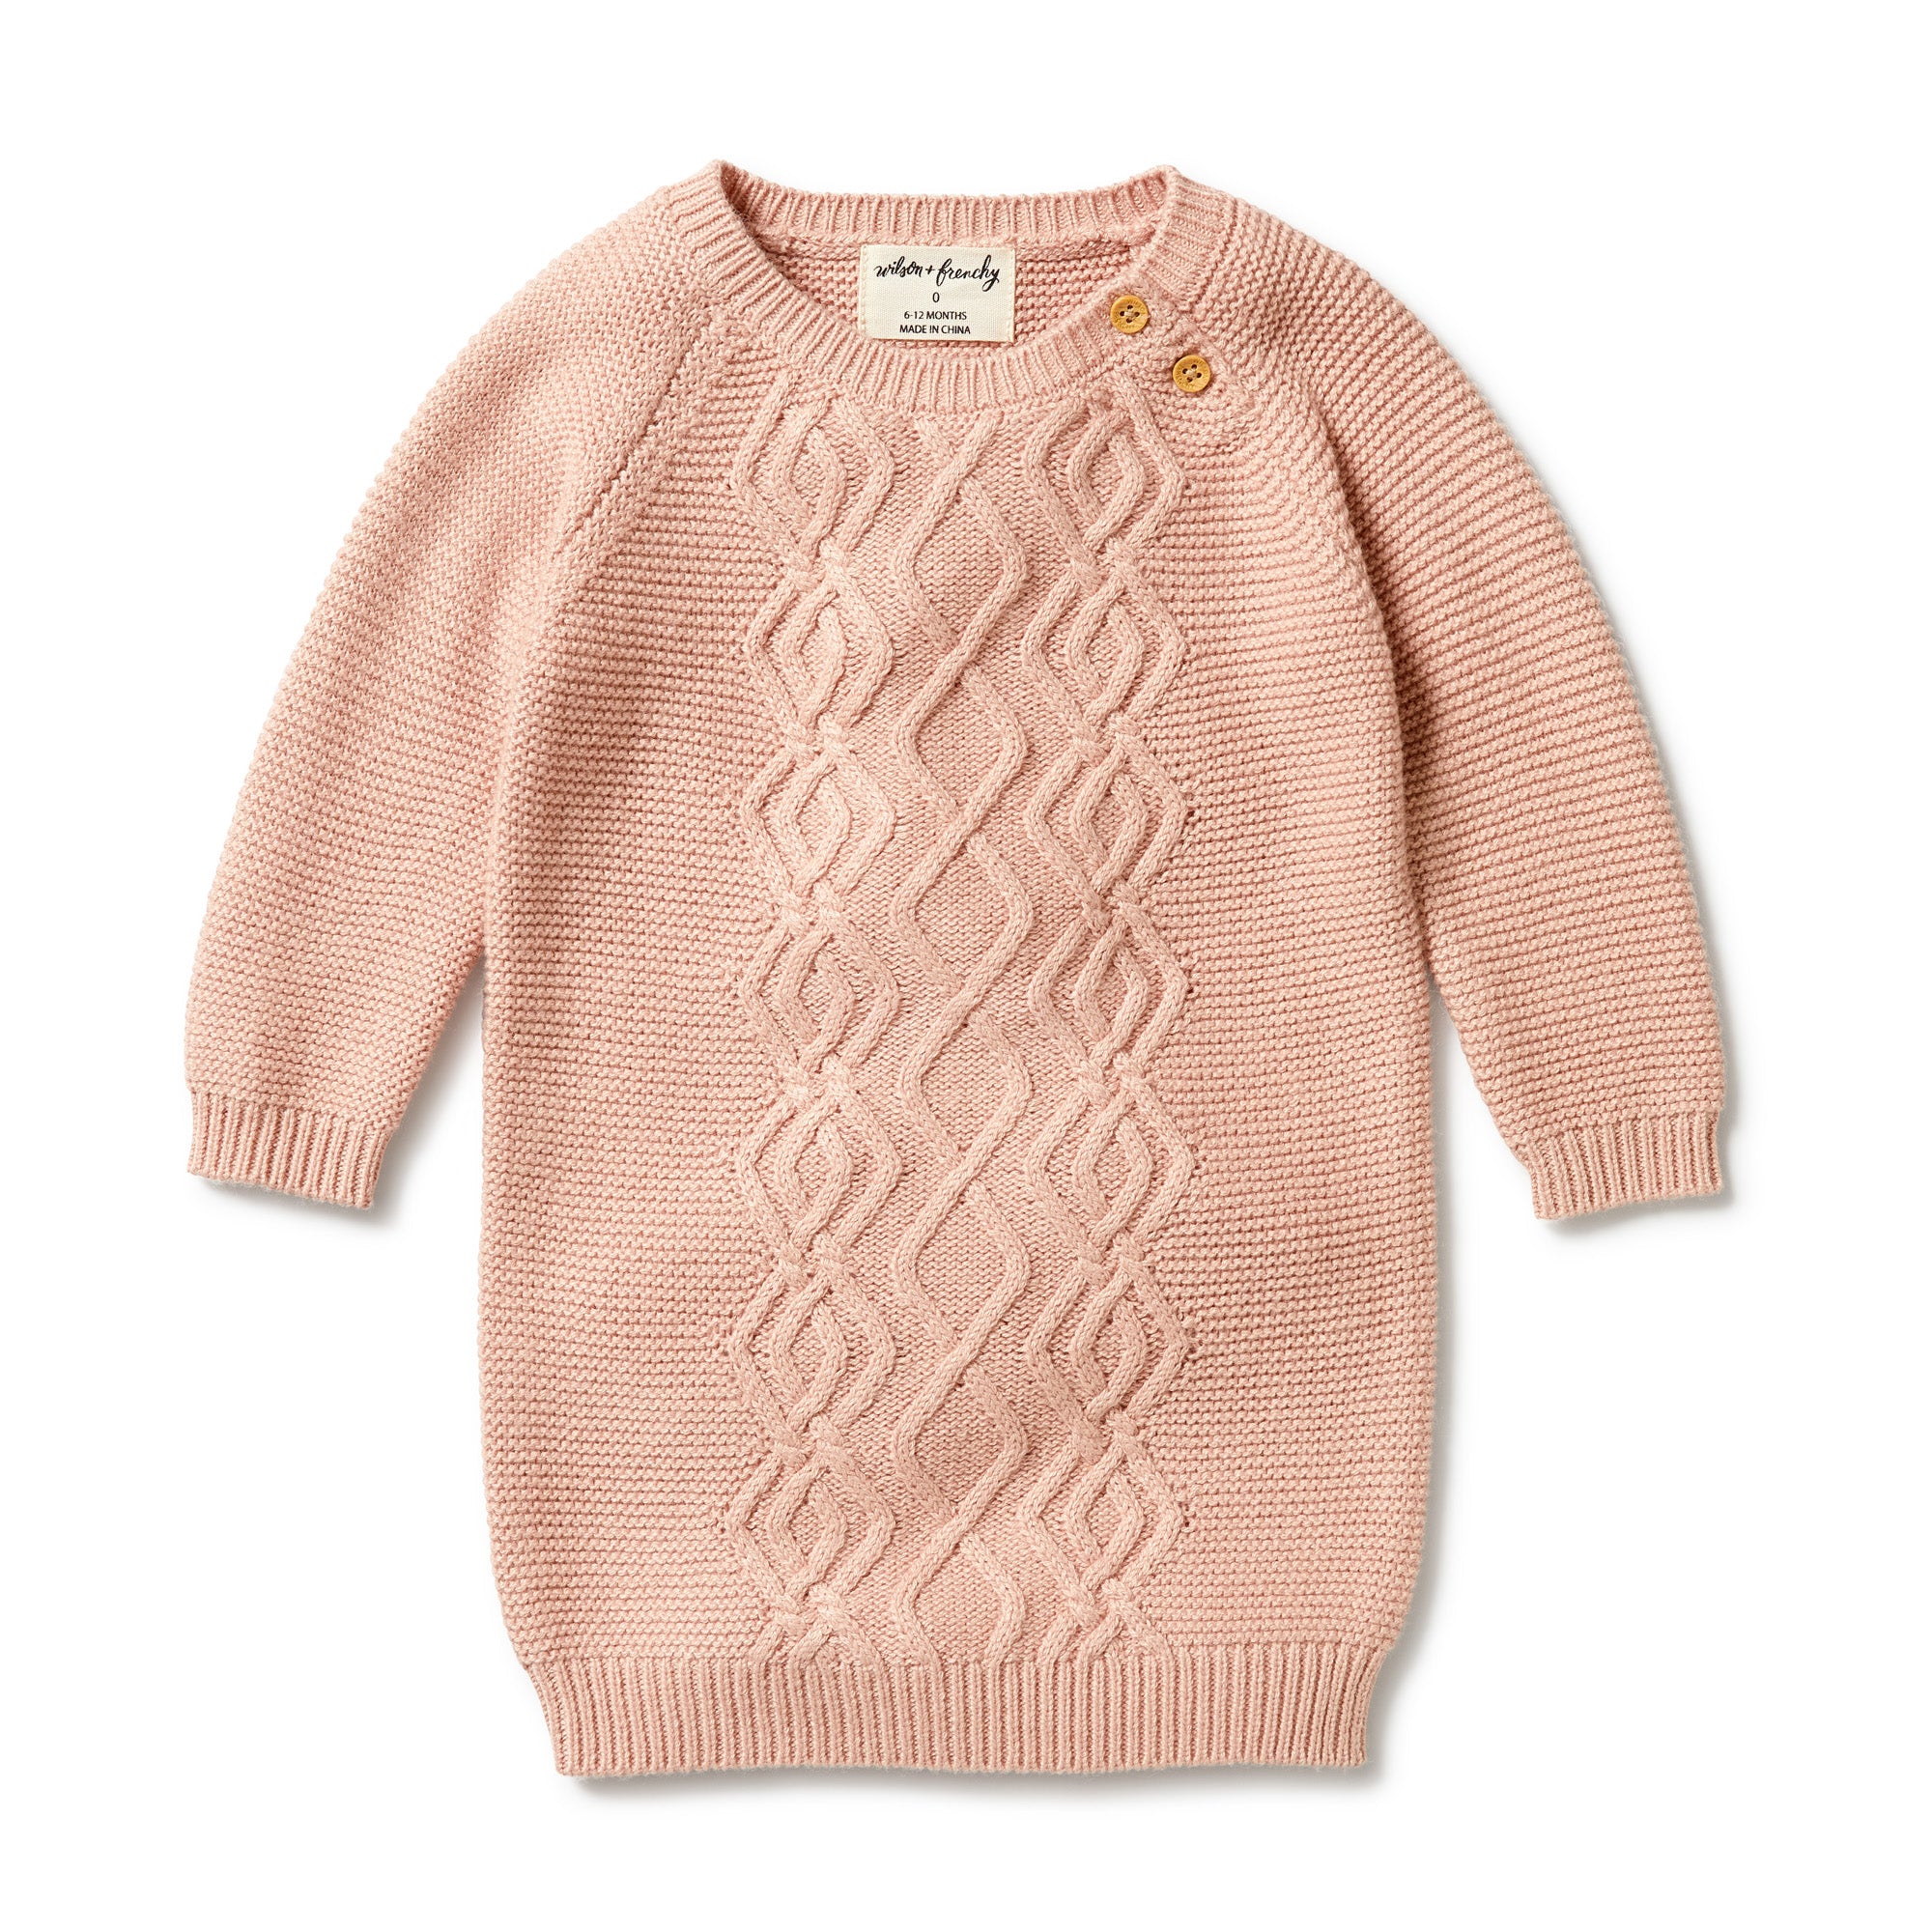 Wilson & Frenchy - Knitted Cable Dress - Rose